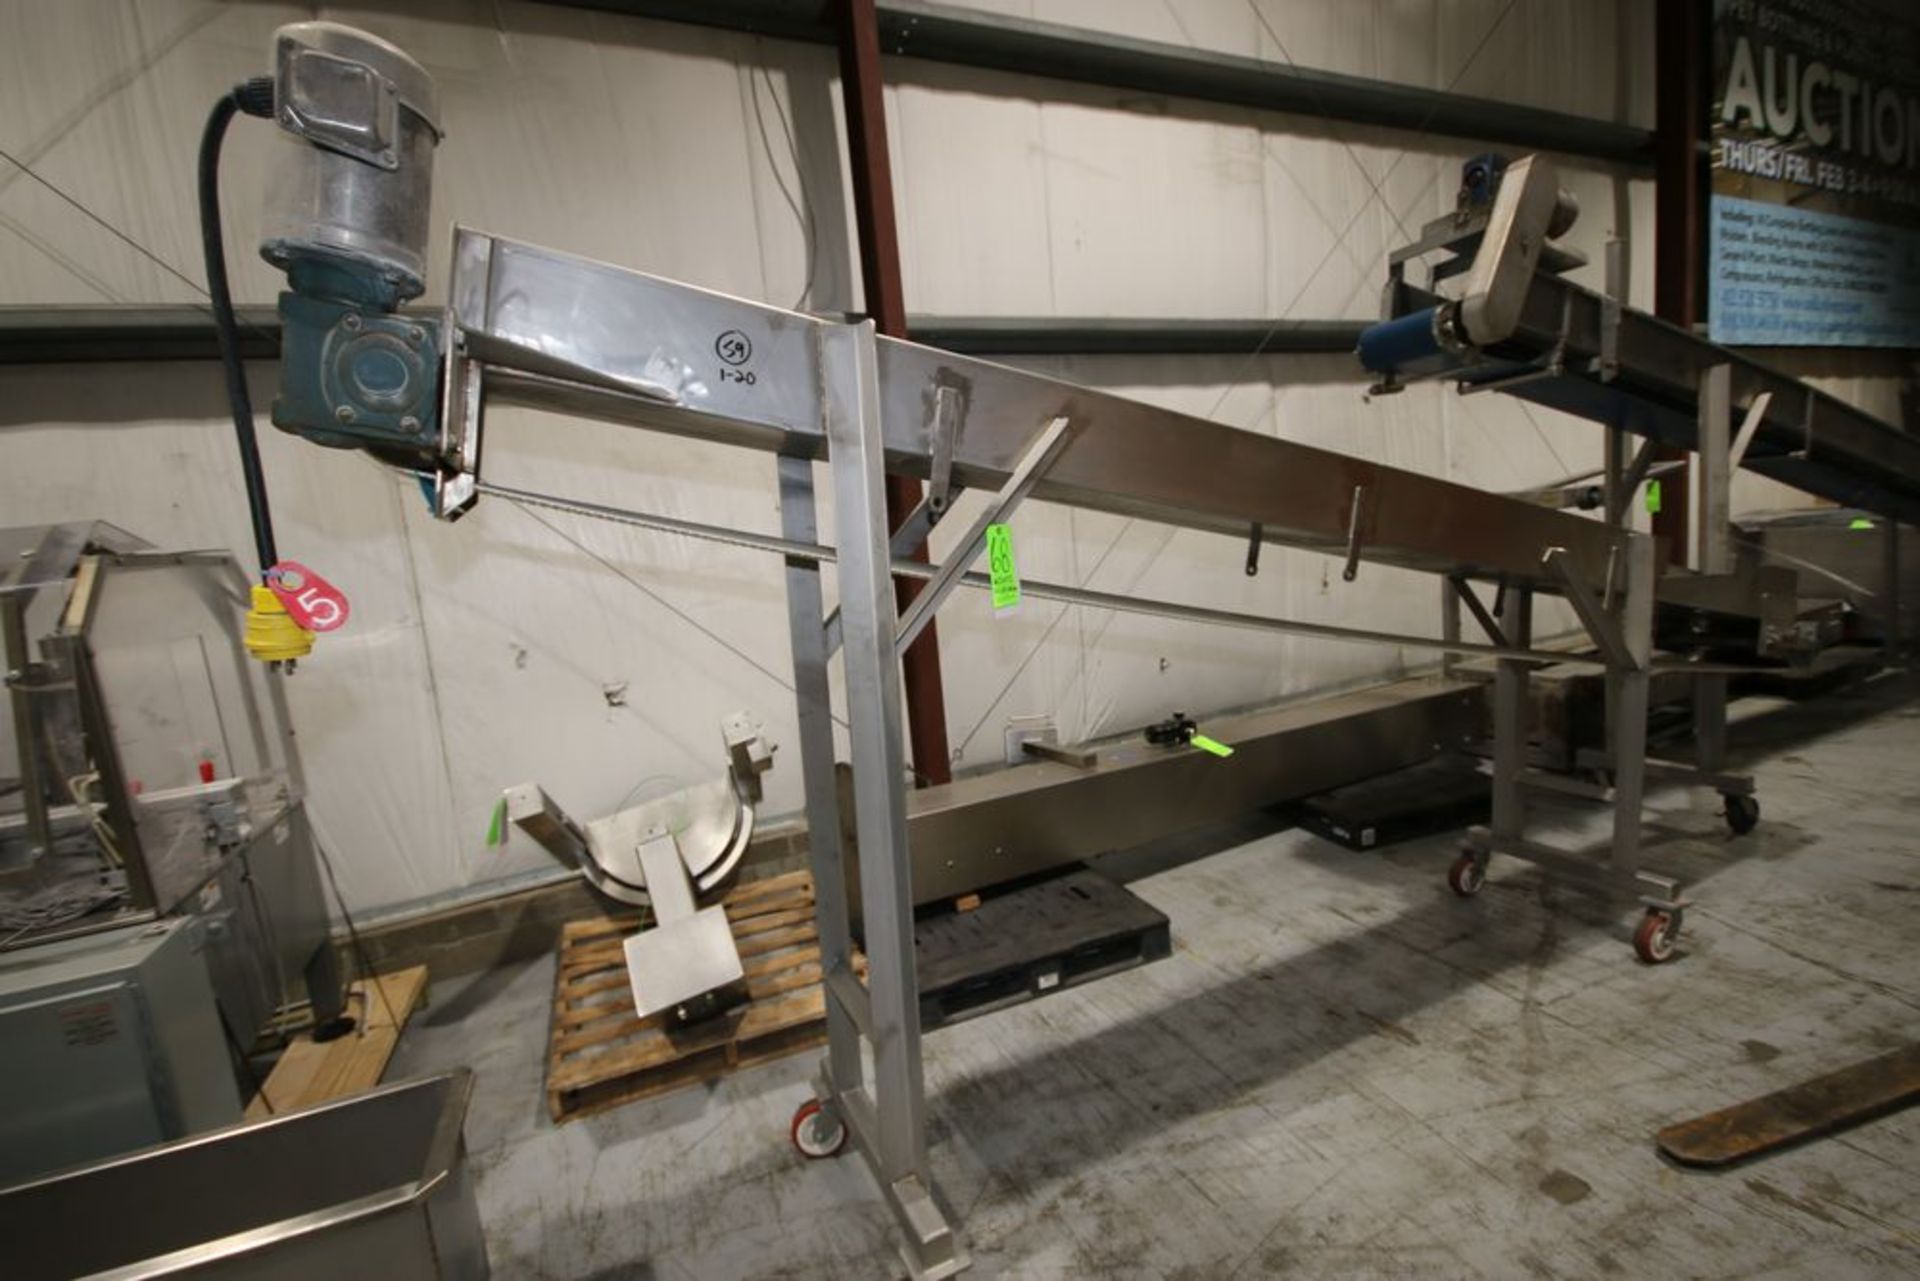 S/S Incline Conveyor, with Aprox. 11" W Rubber Belt, with S/S Clad Motor, Overall Dims.: Aprox. 175"